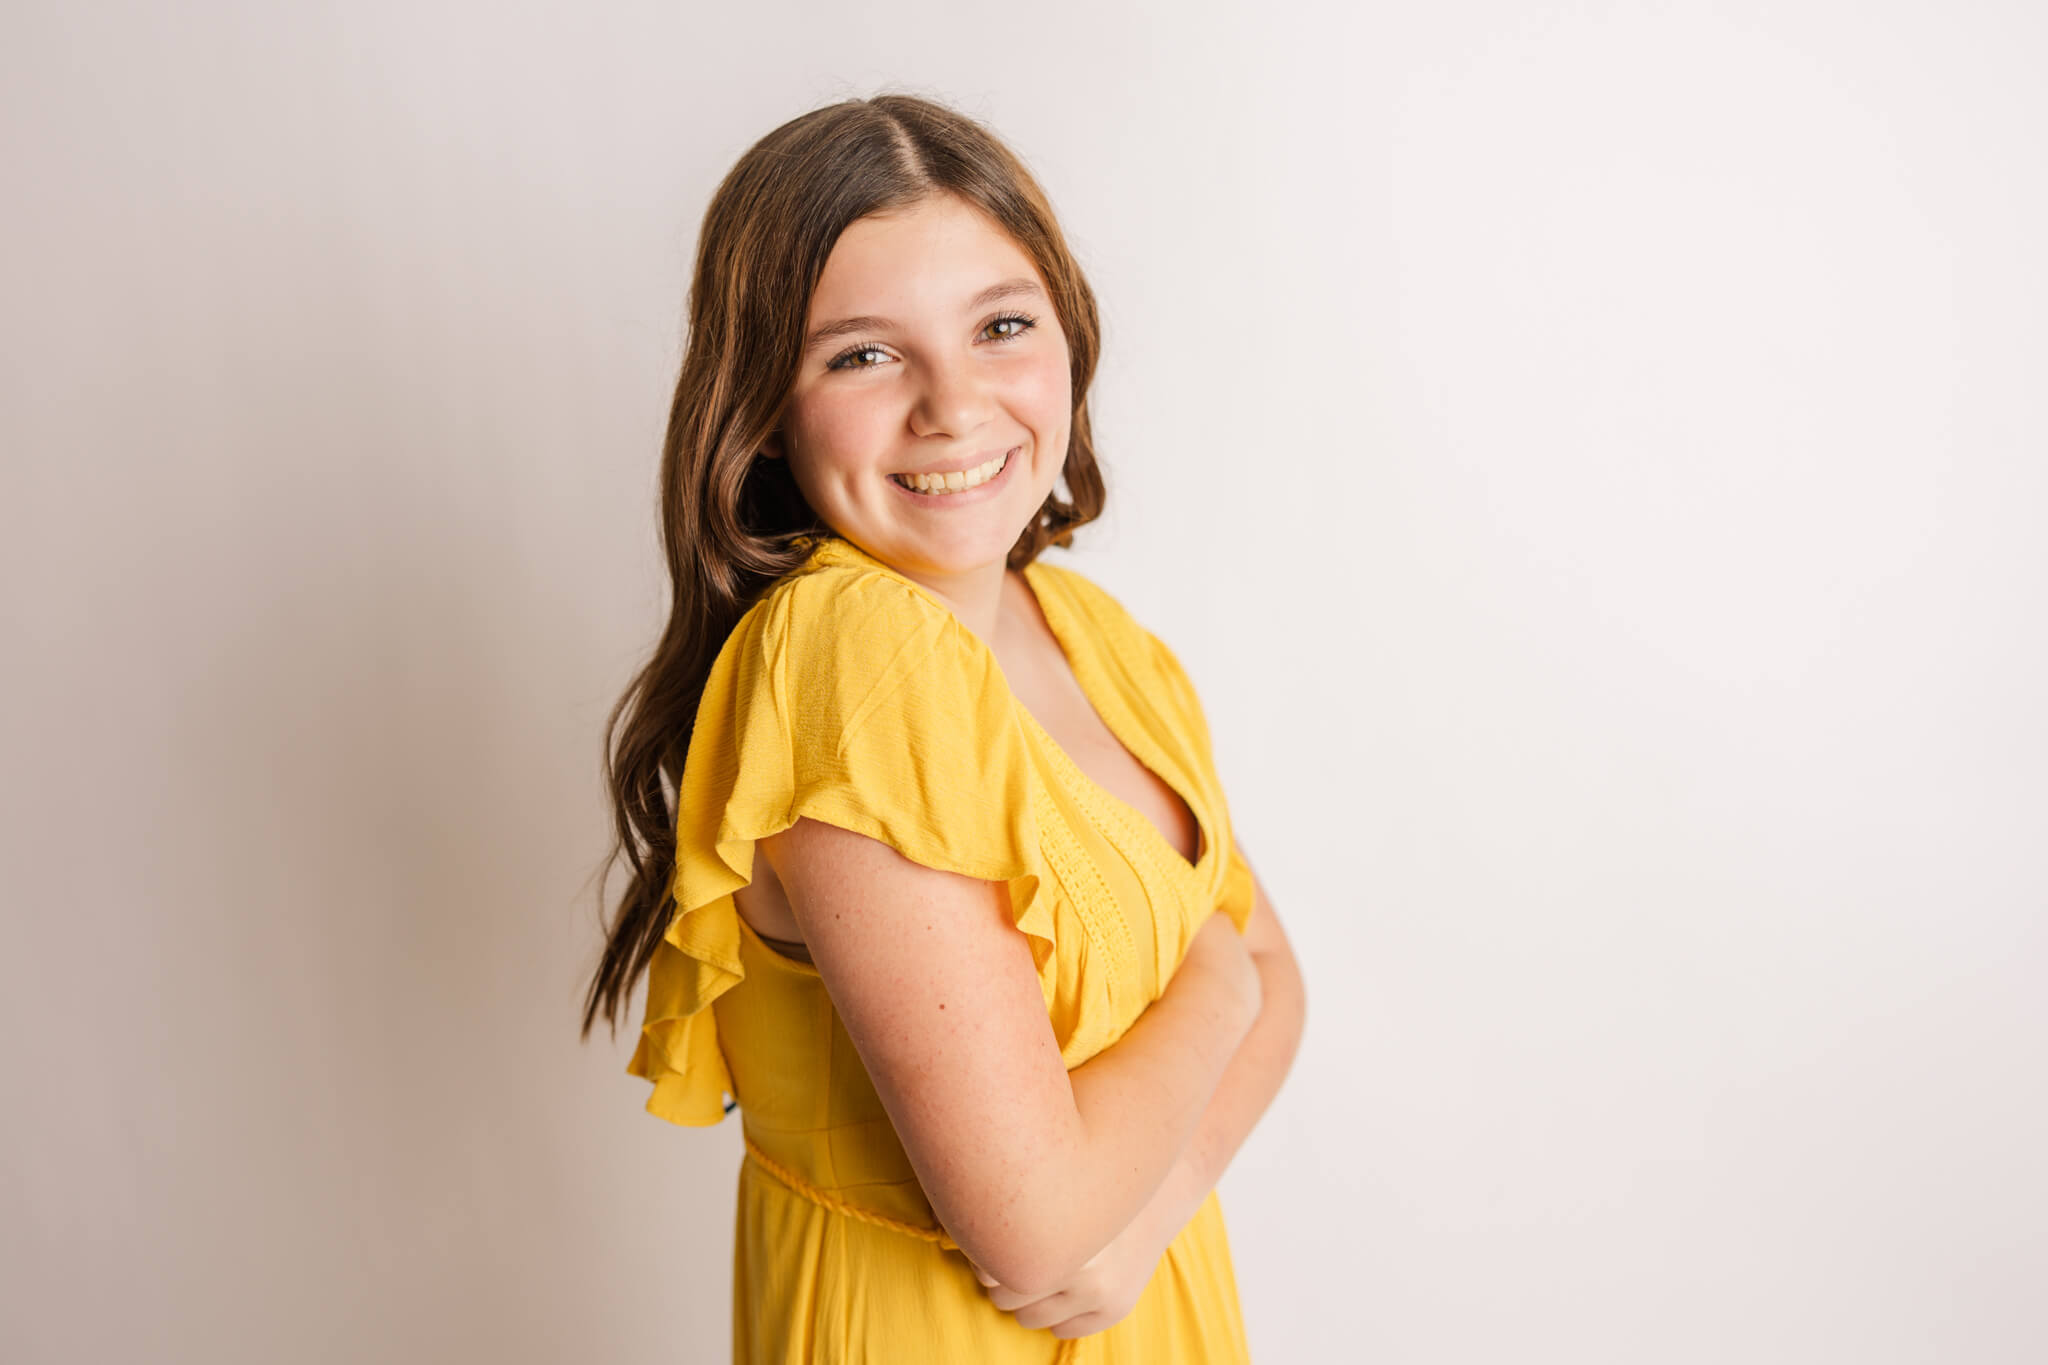 13 year old girl laughing during her milestone photography session